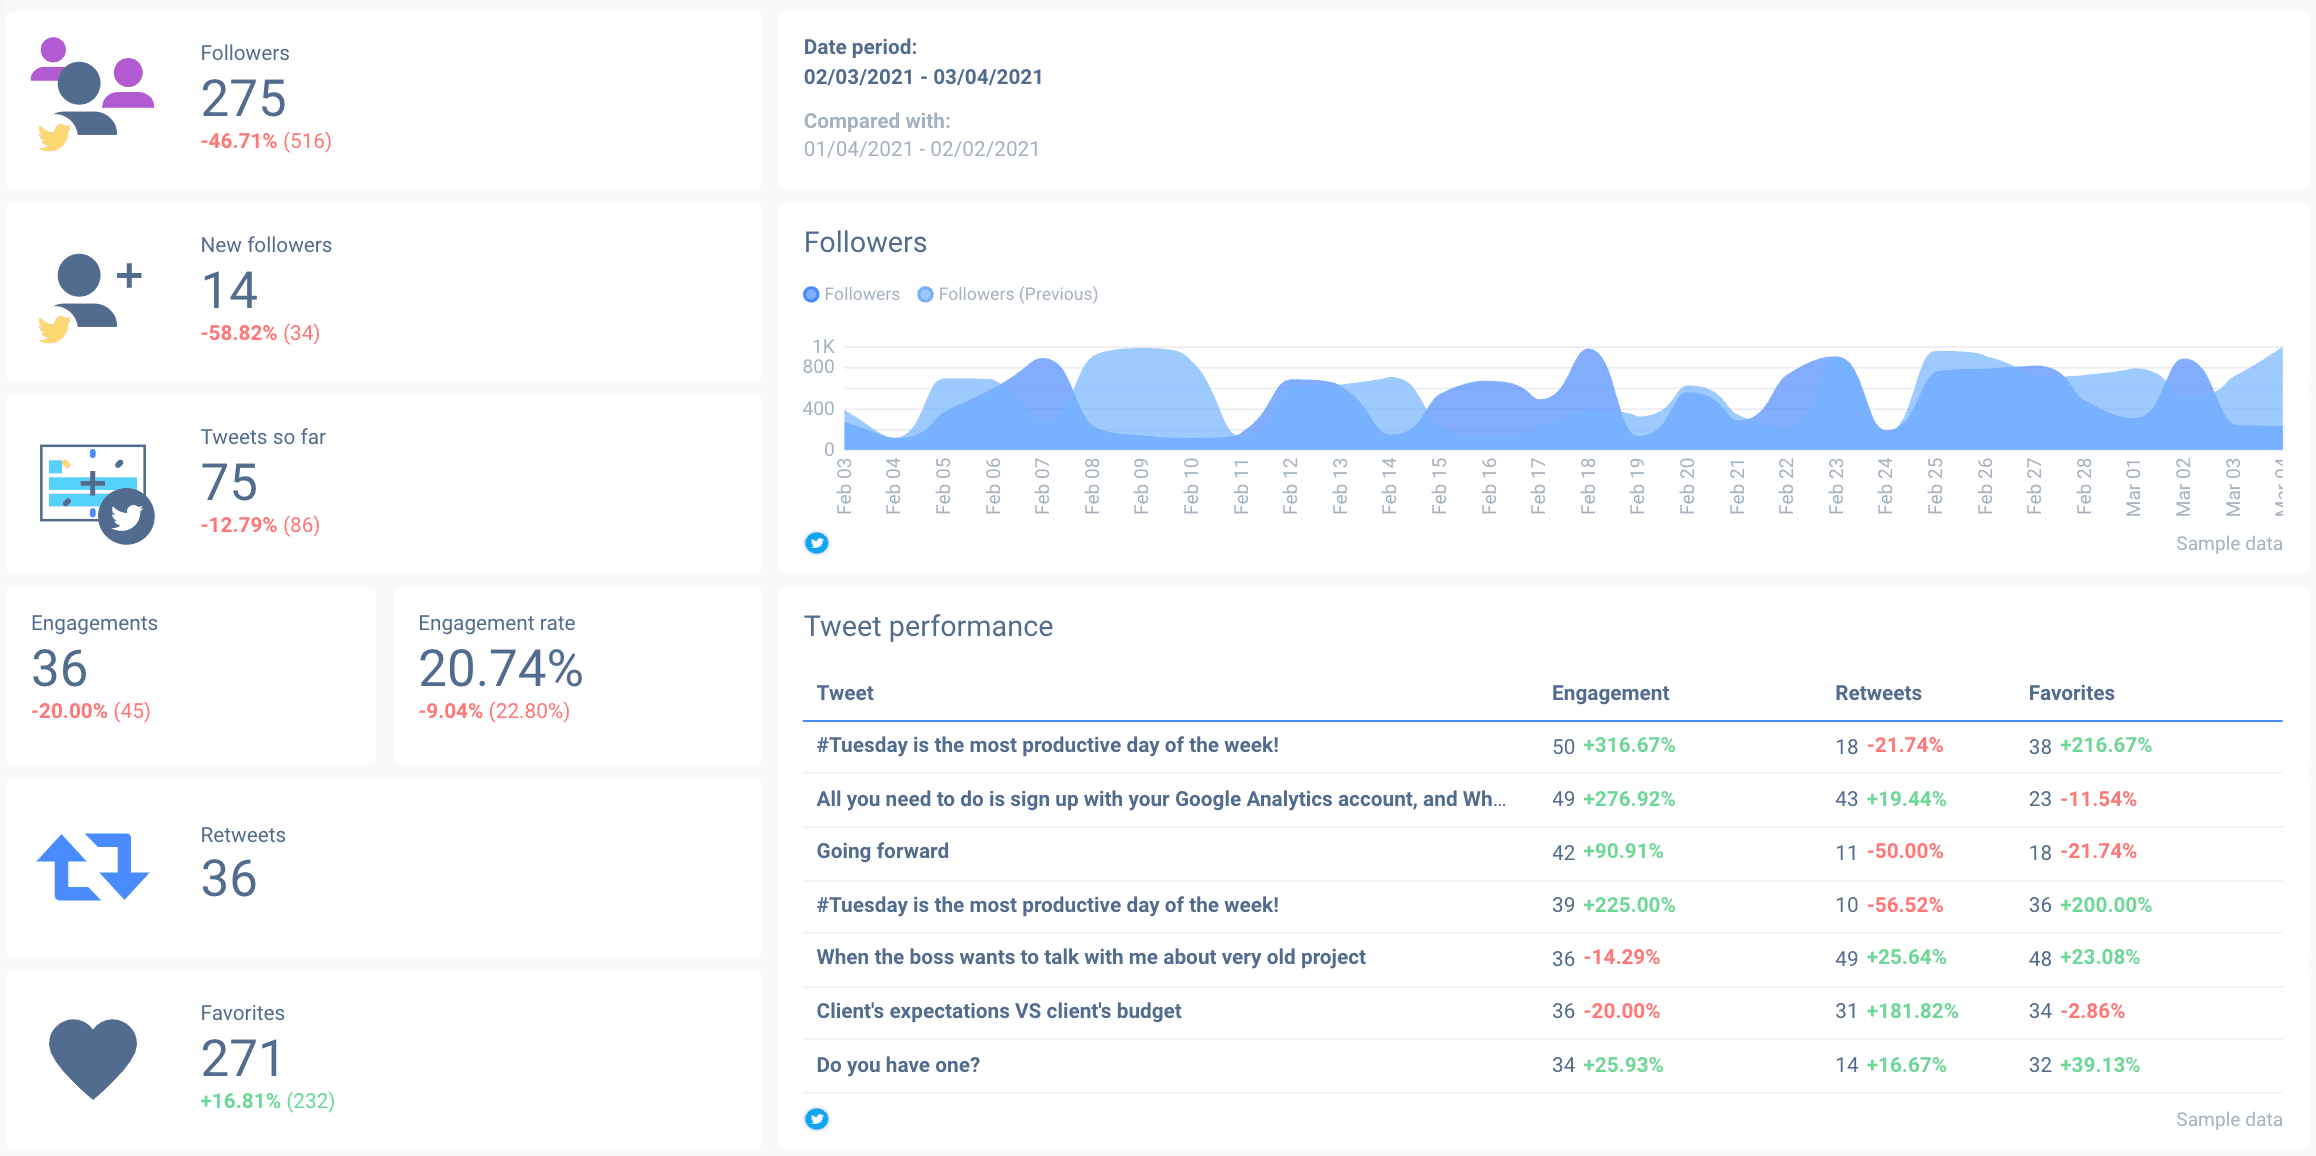 A general overview of the entire Twitter analytics dashboard.